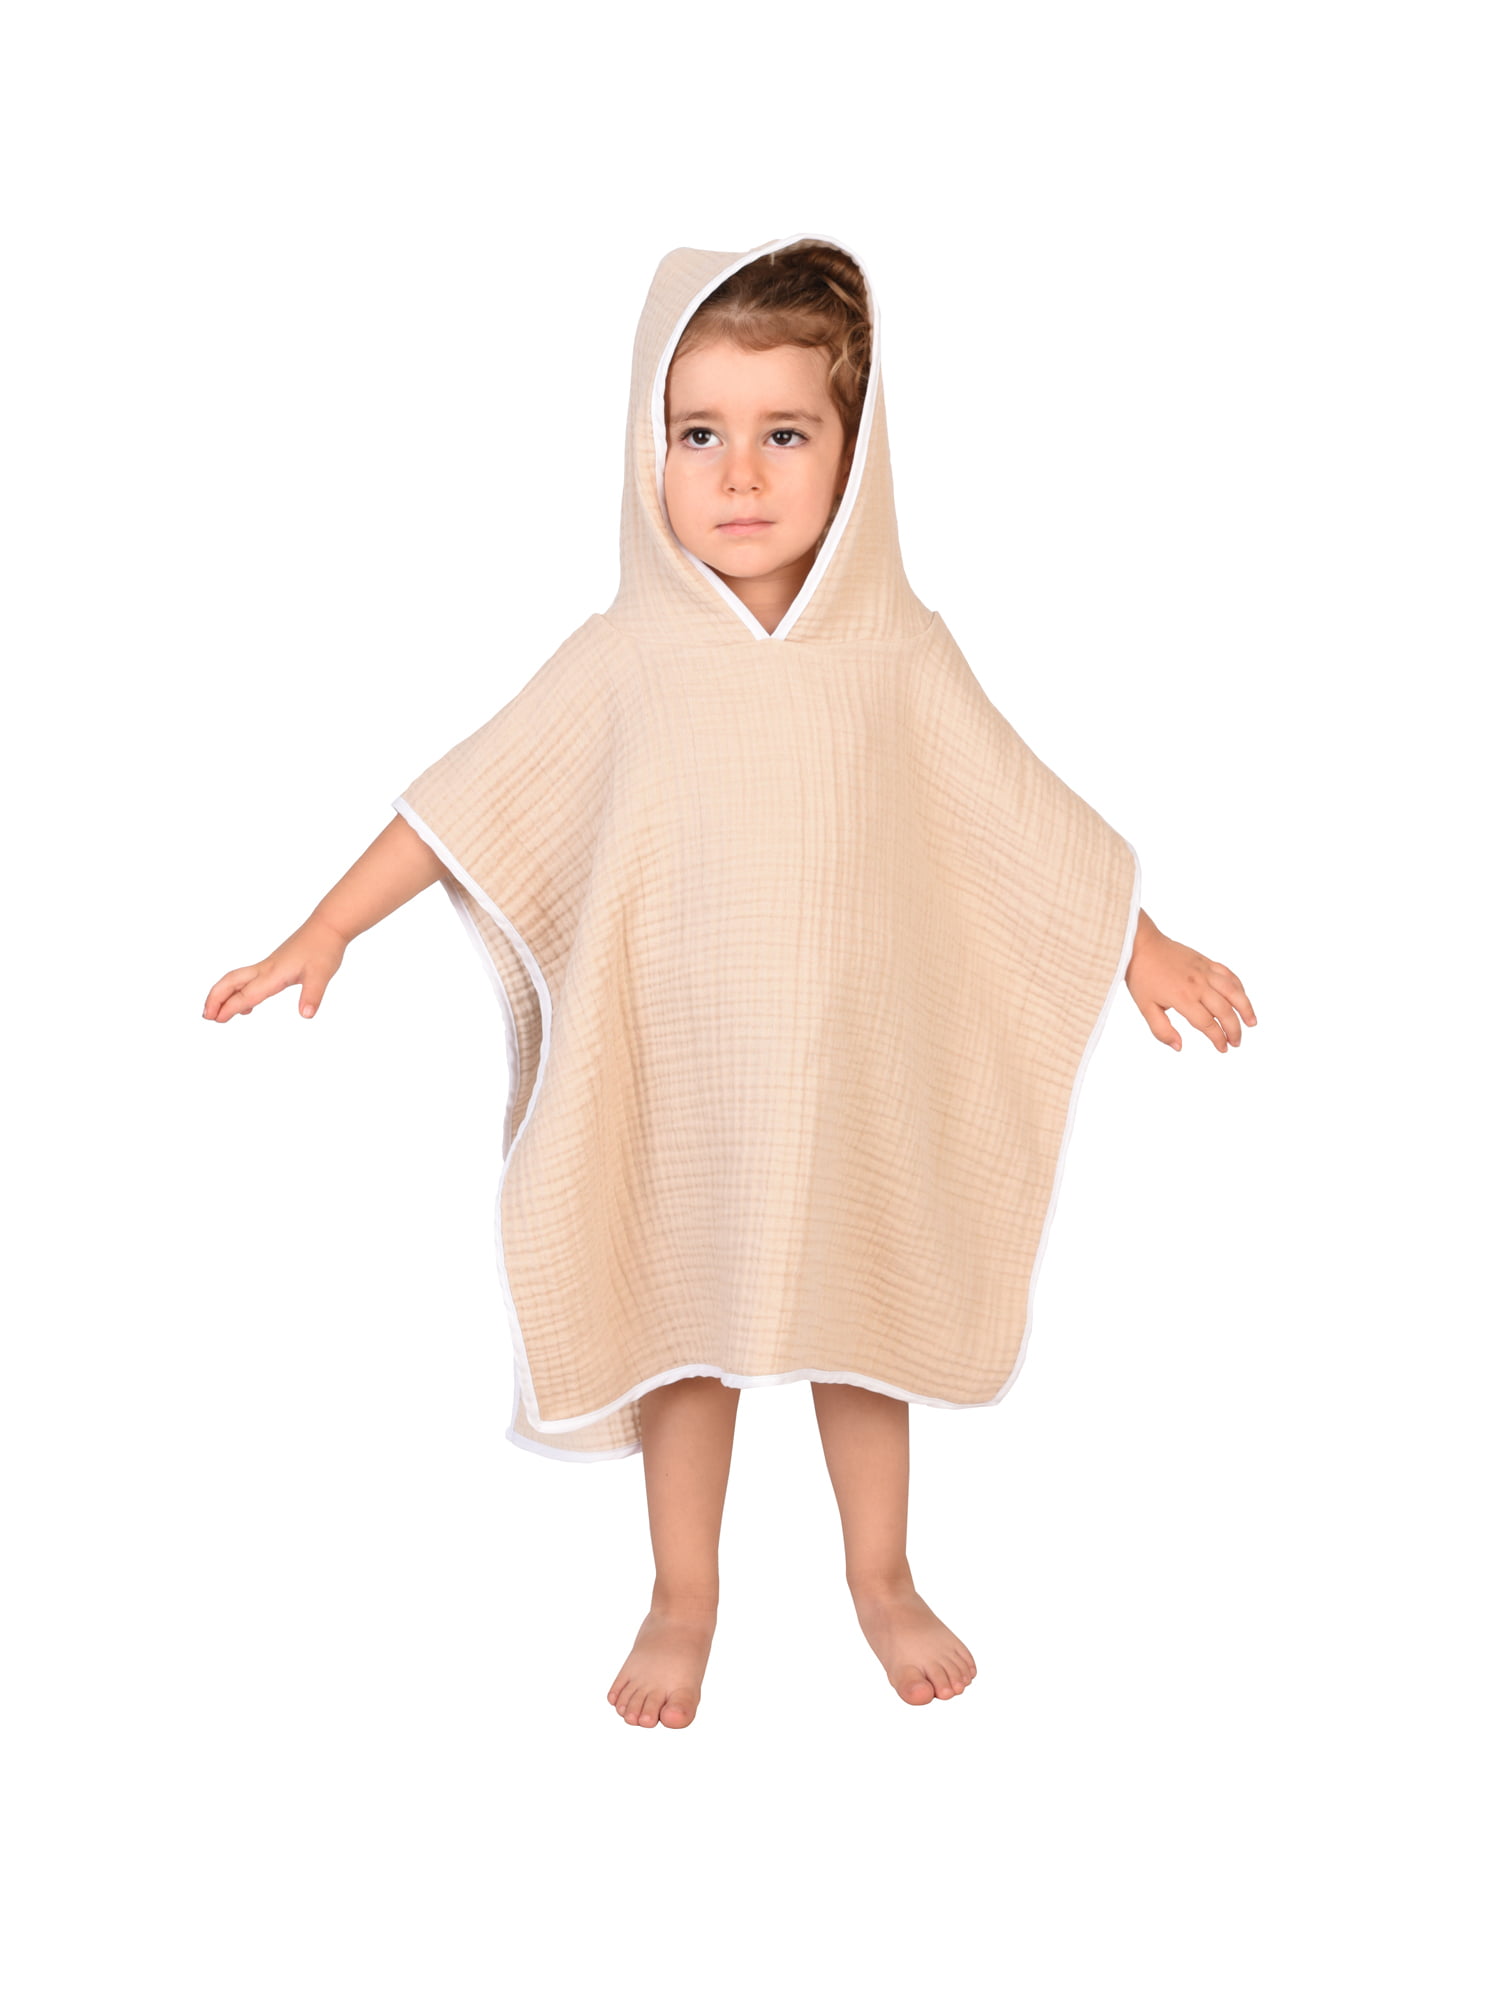 Dandiny Baby Girl Boy Toddler Kids Poncho Cape Outfit - 100% Muslin Hoodie Style Poncho for Beach or After Bath - After Bath Or Beach Cover Up 1 2 3 4 5 Year Walmart.com